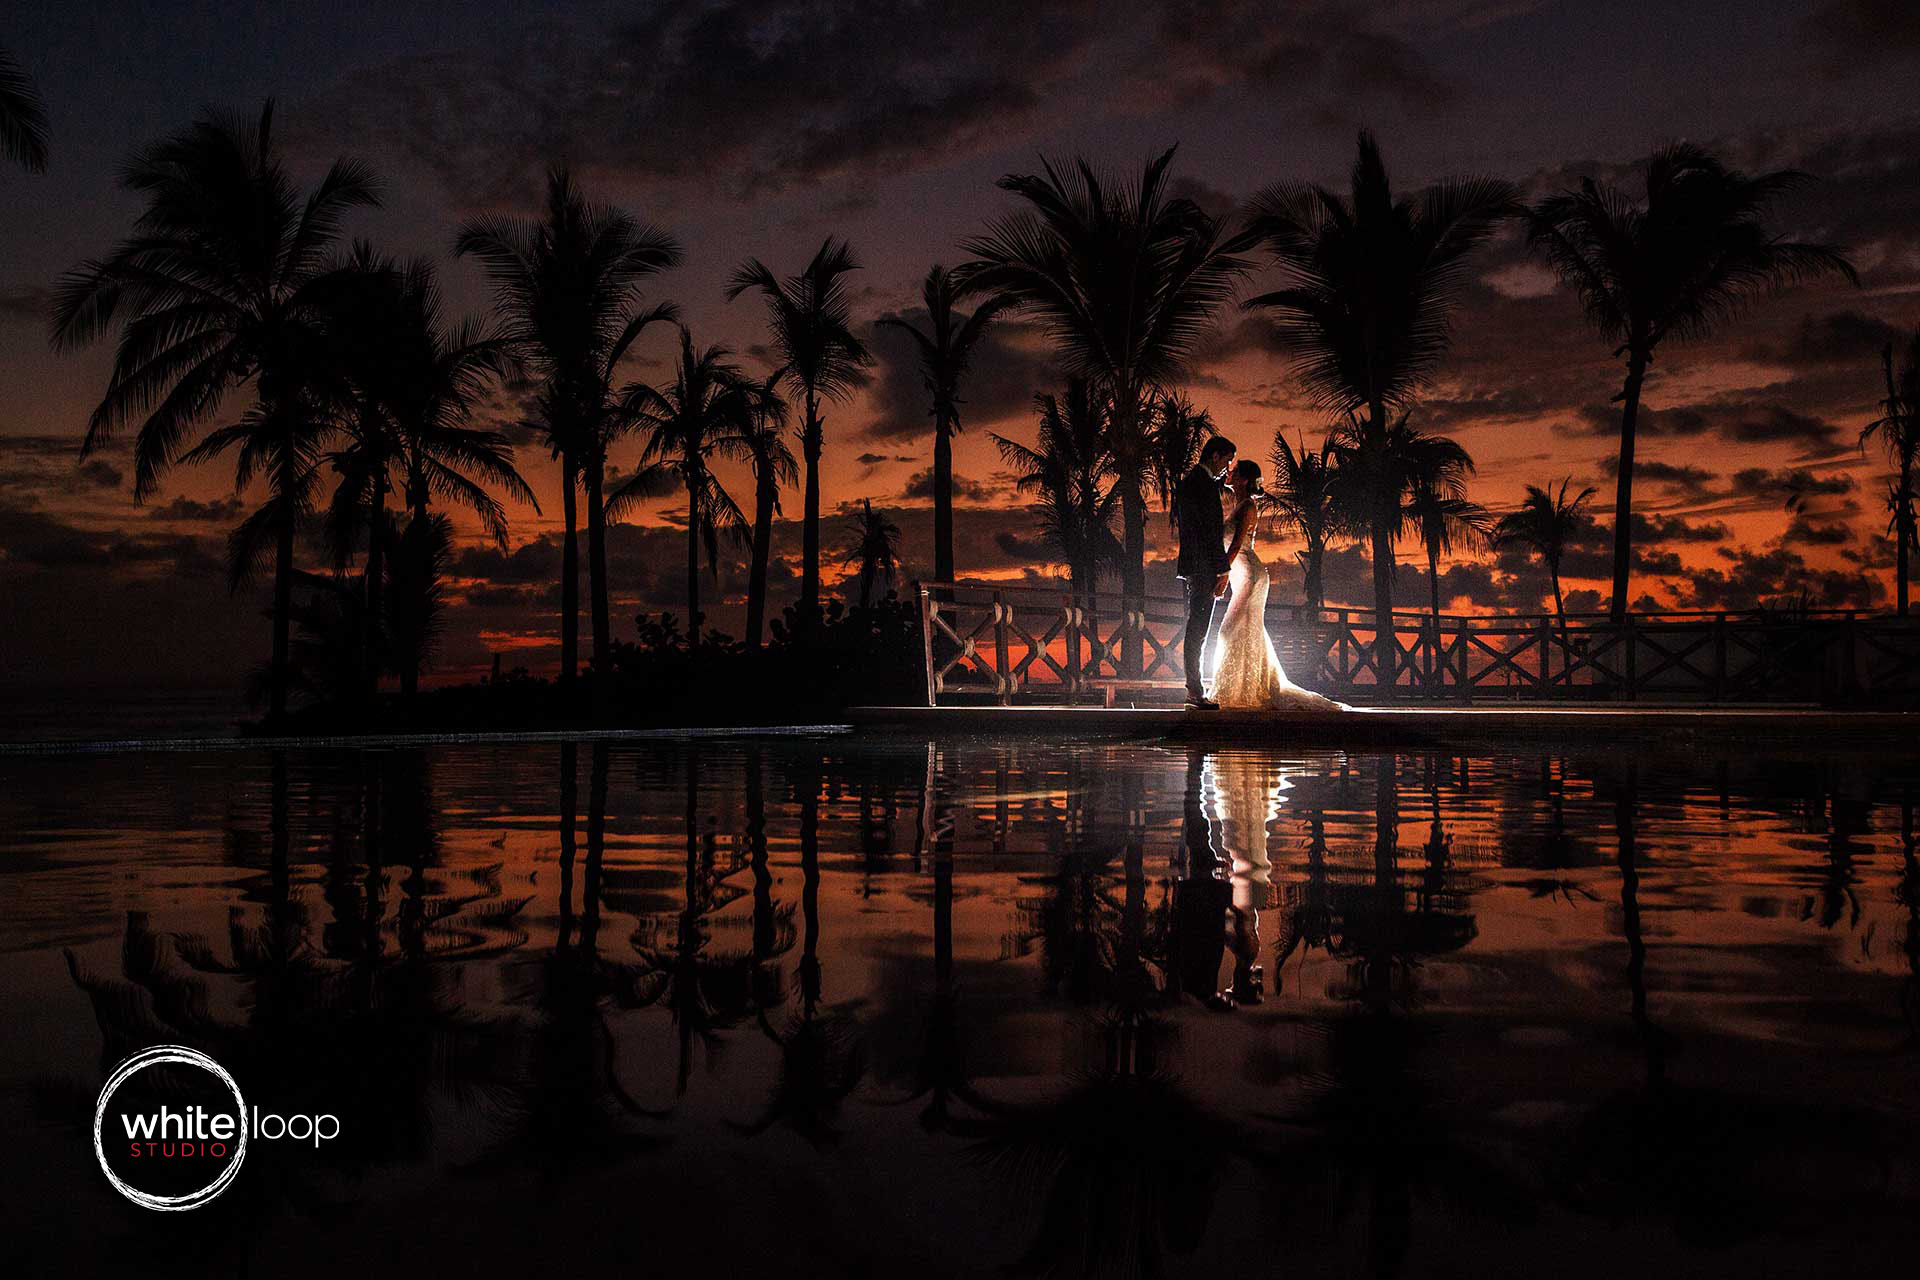 The groom and the bride in formal dress are posing for a sunset shot on the border of a pool where are reflected the palms.